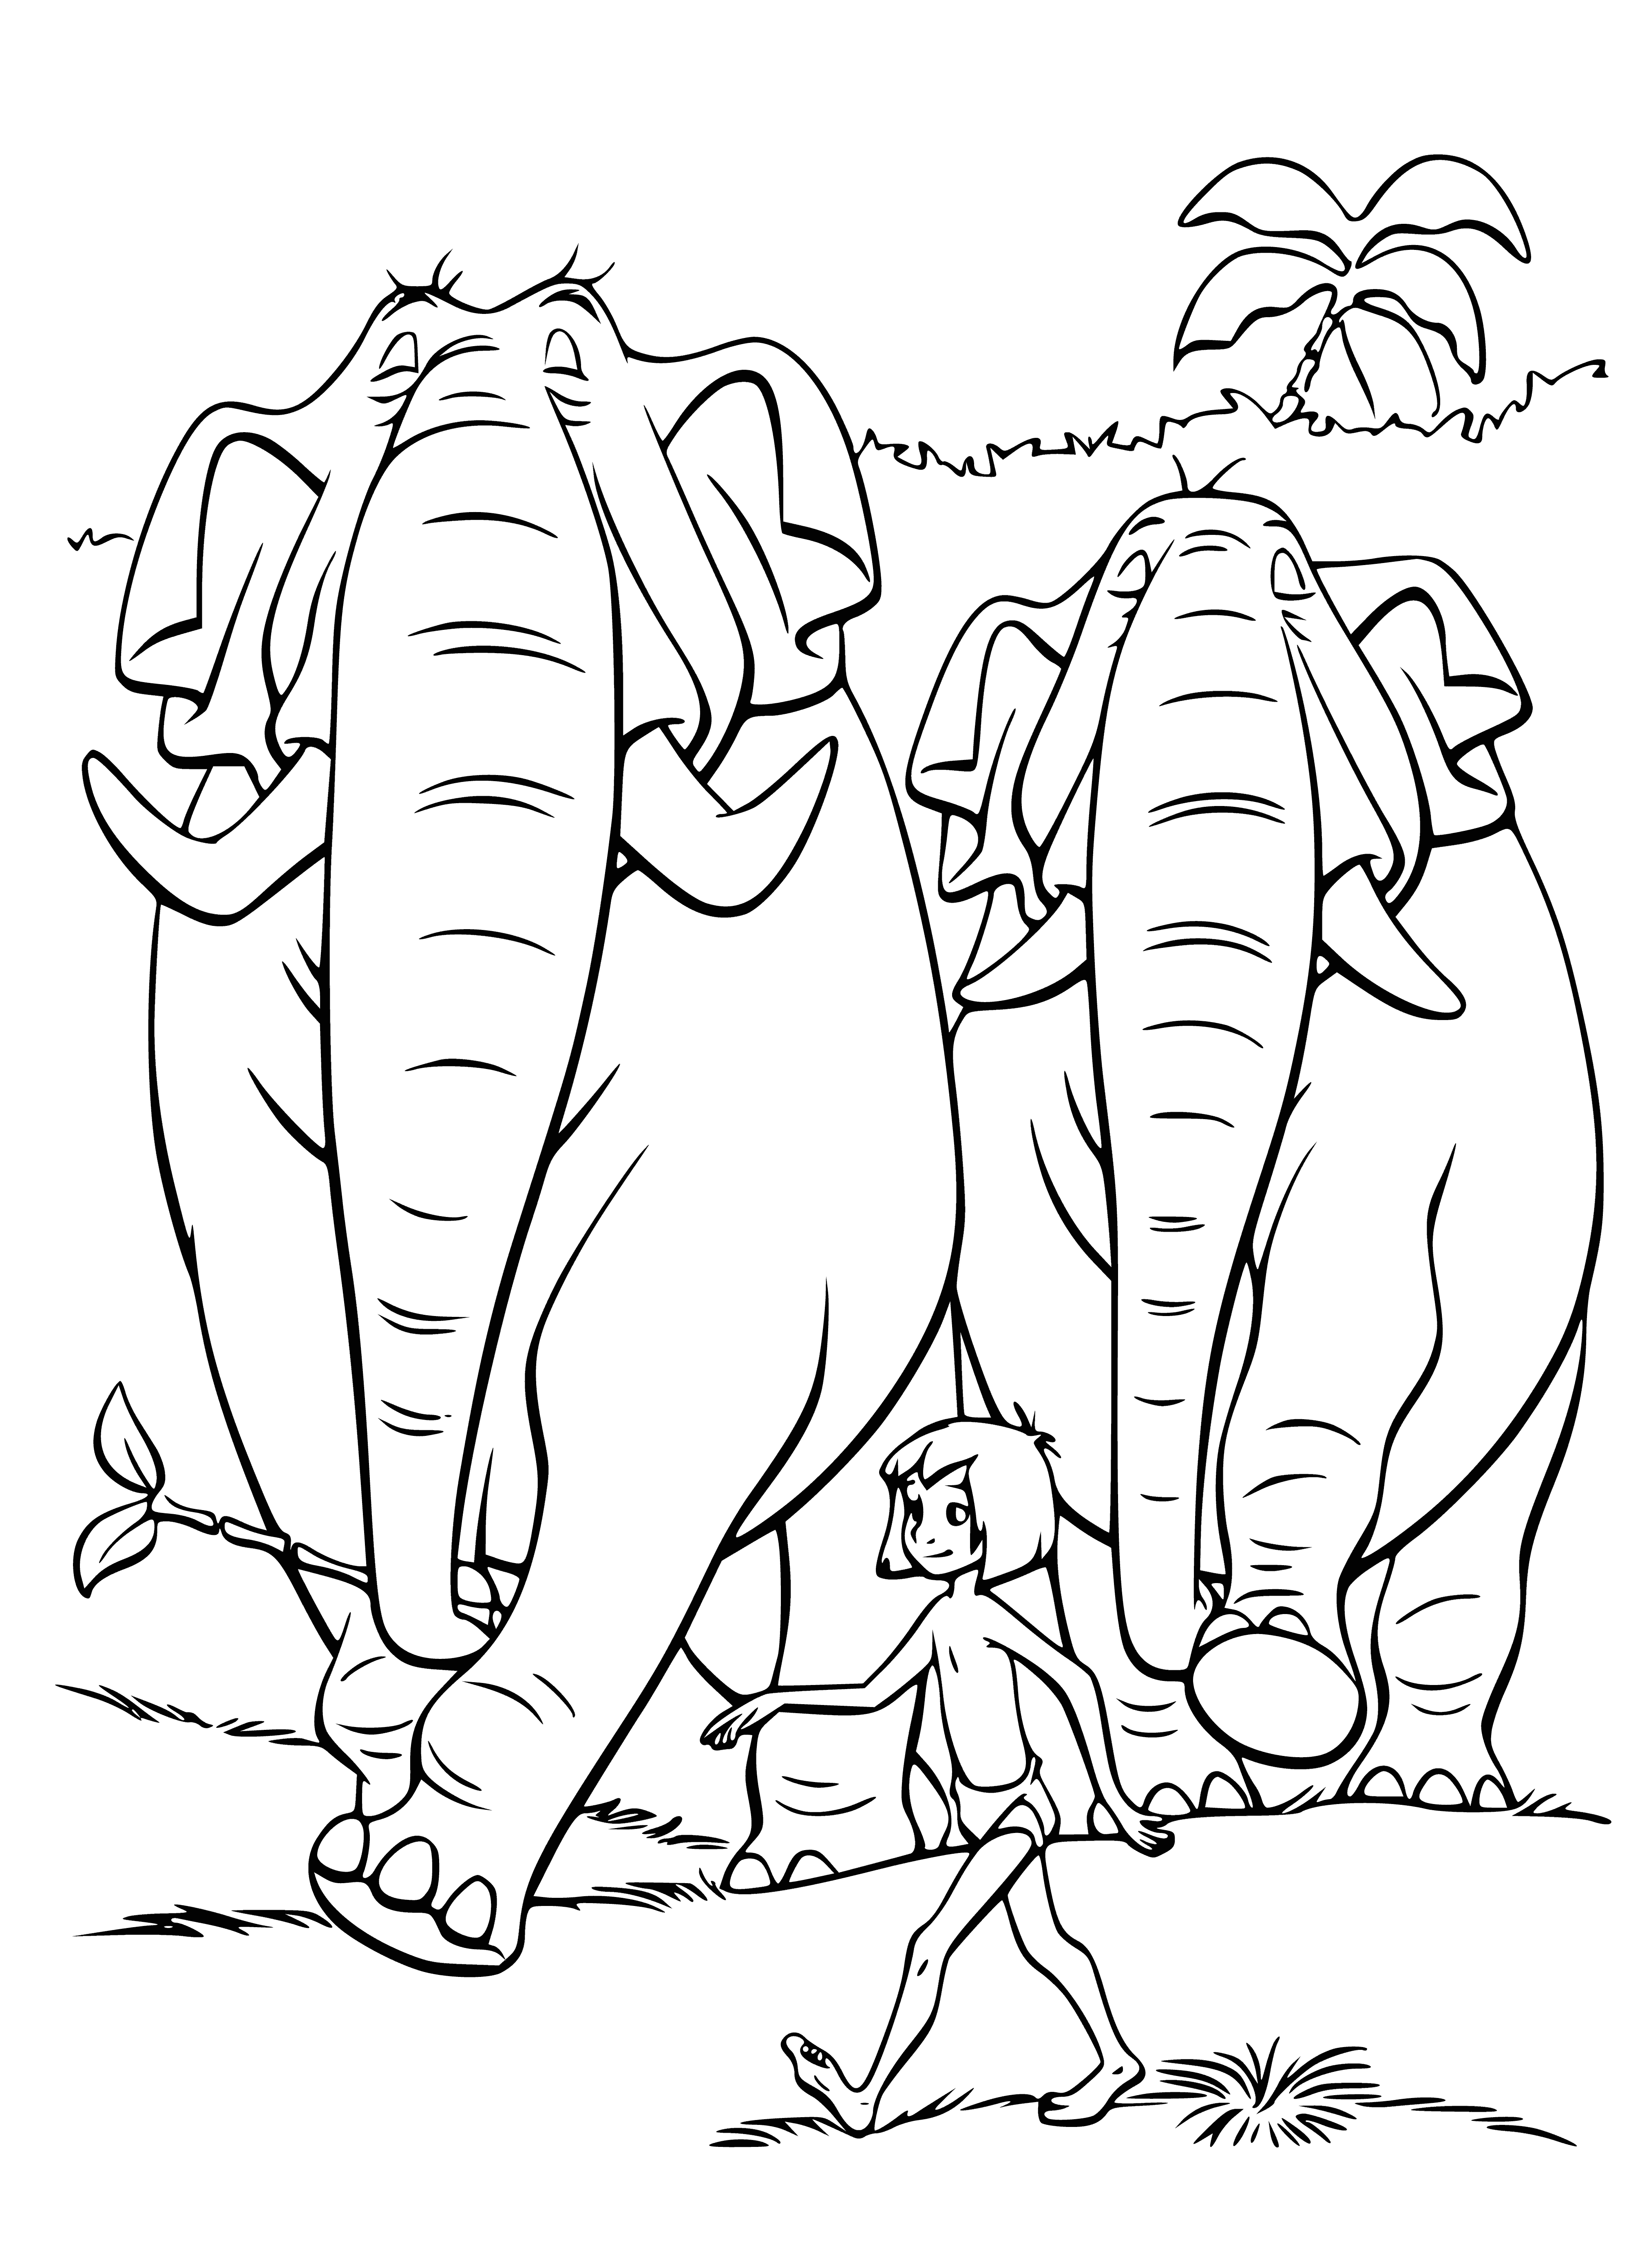 Elephants and Mowgli coloring page